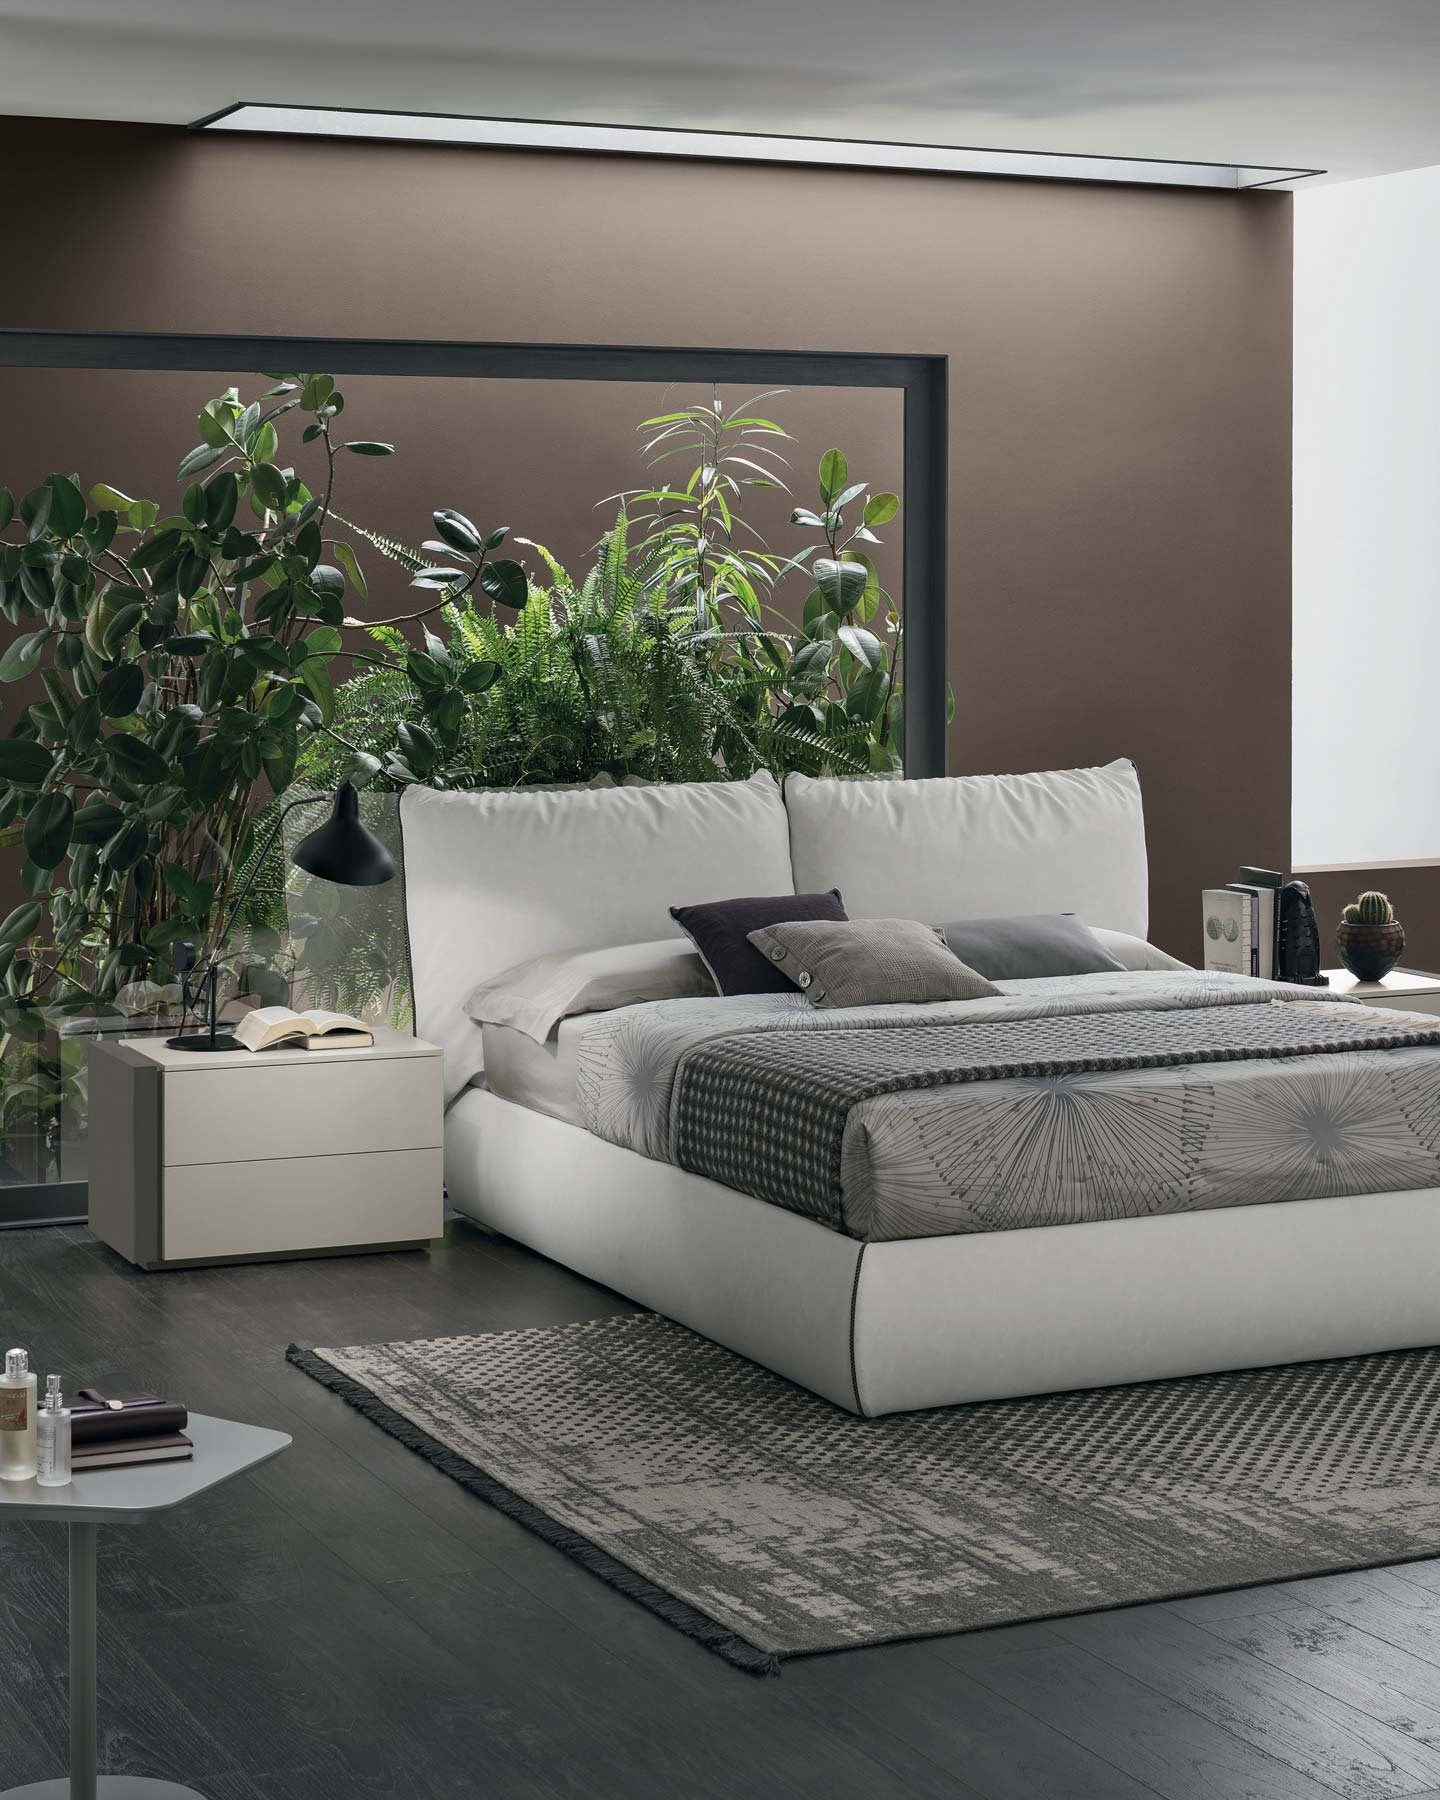 Sogno Bed from Tomasella